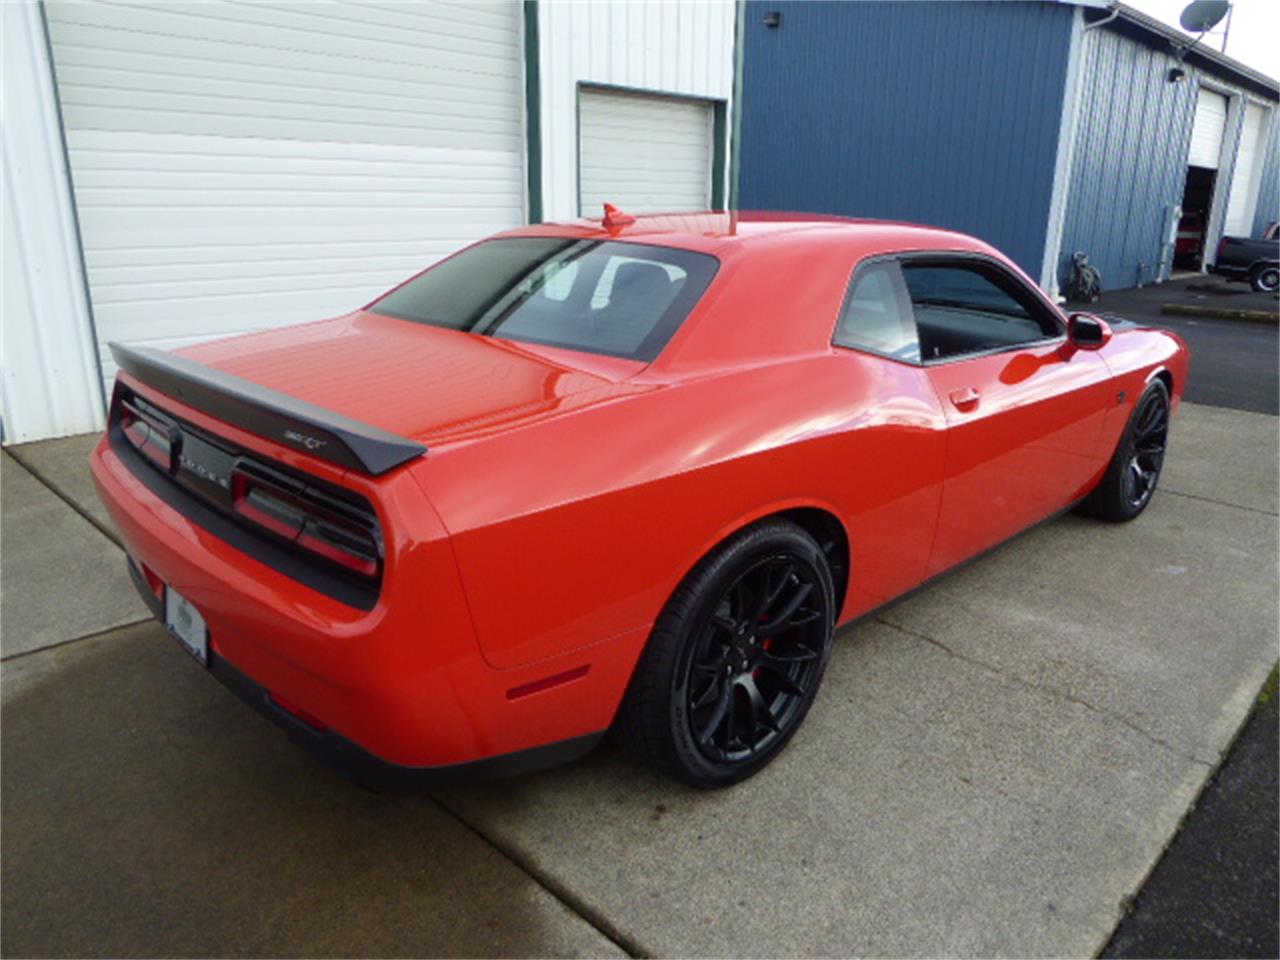 Dodge challenger insurance for 18 year old Idea